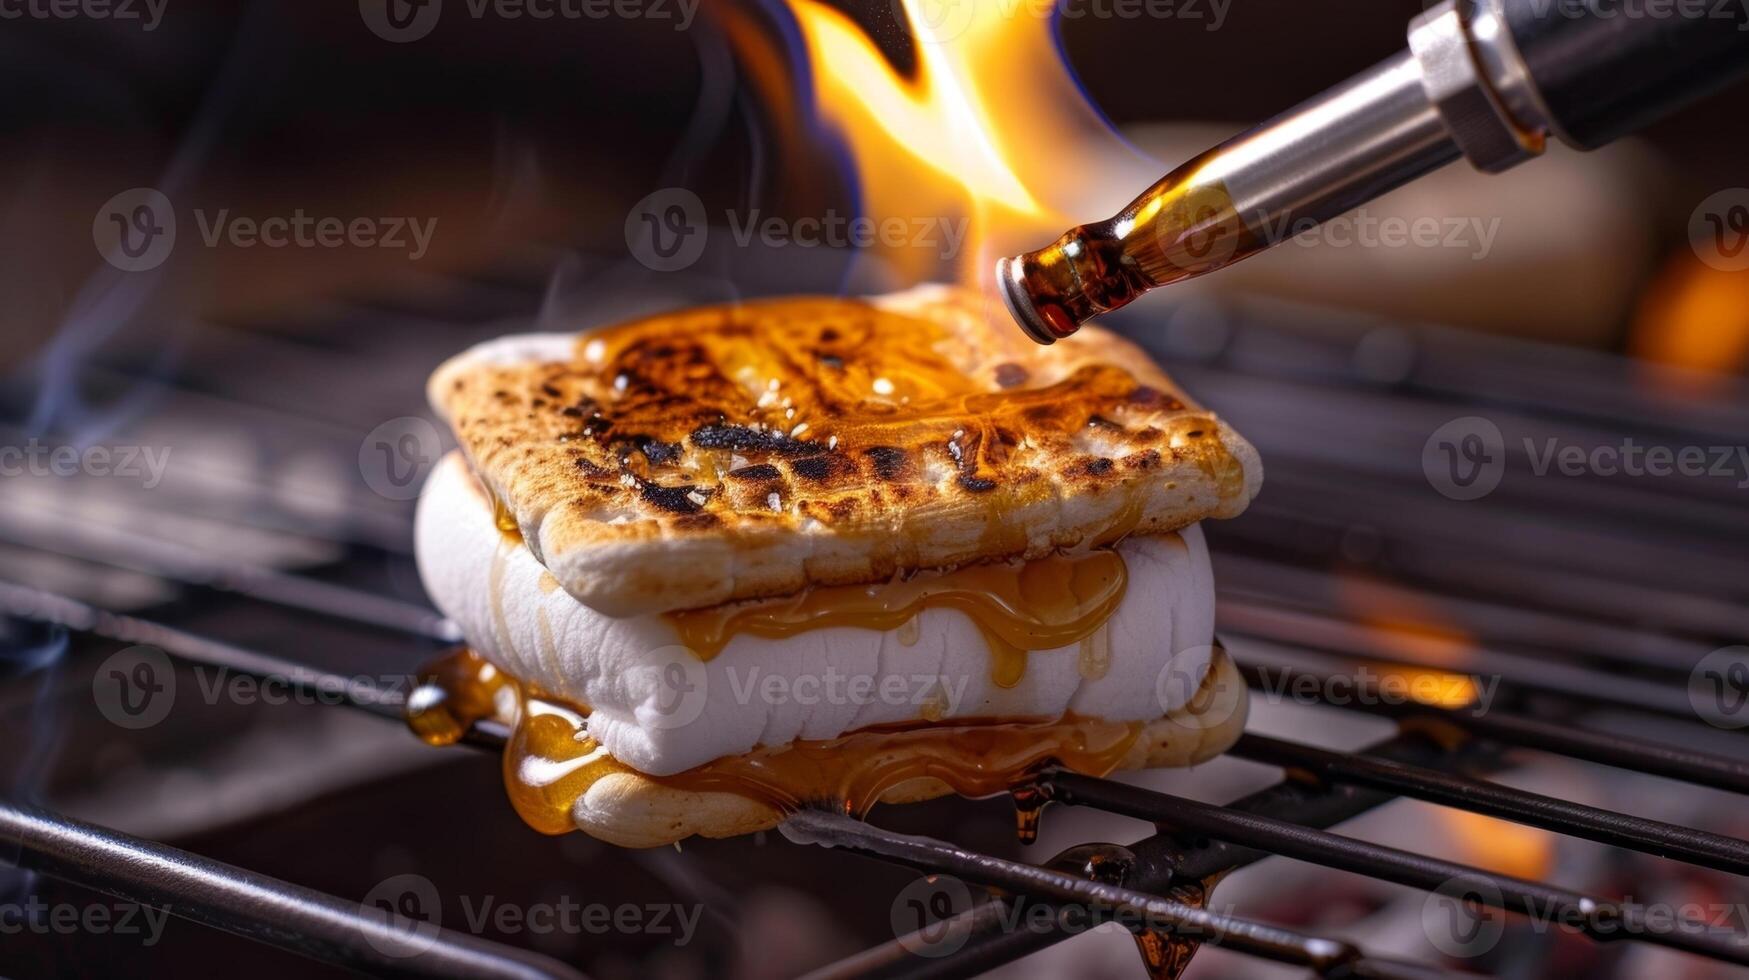 A handheld blowtorch being used to caramelize the marshmallow before adding it to the smore adding an extra layer of richness and flavor photo